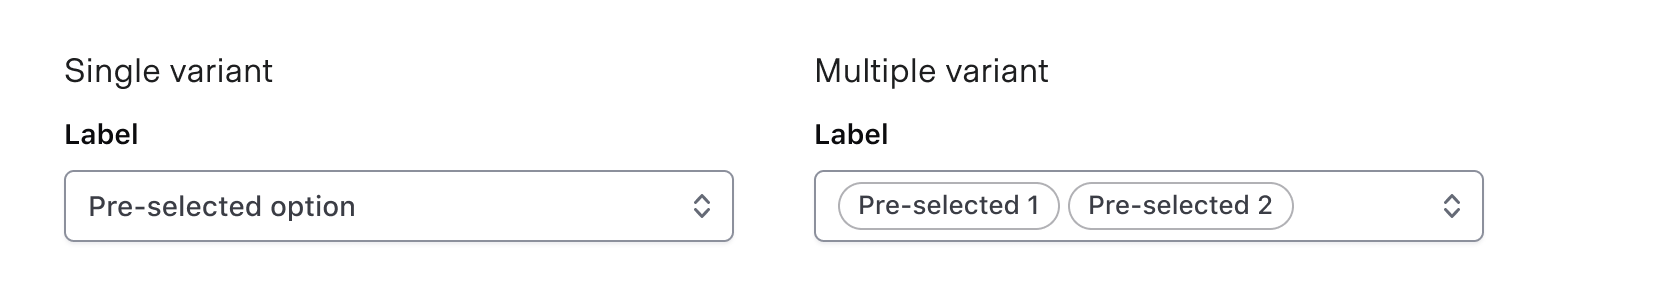 Showing preselected options in both a single and multiple variant. This helps show something has been preselected previously and the user can update their options